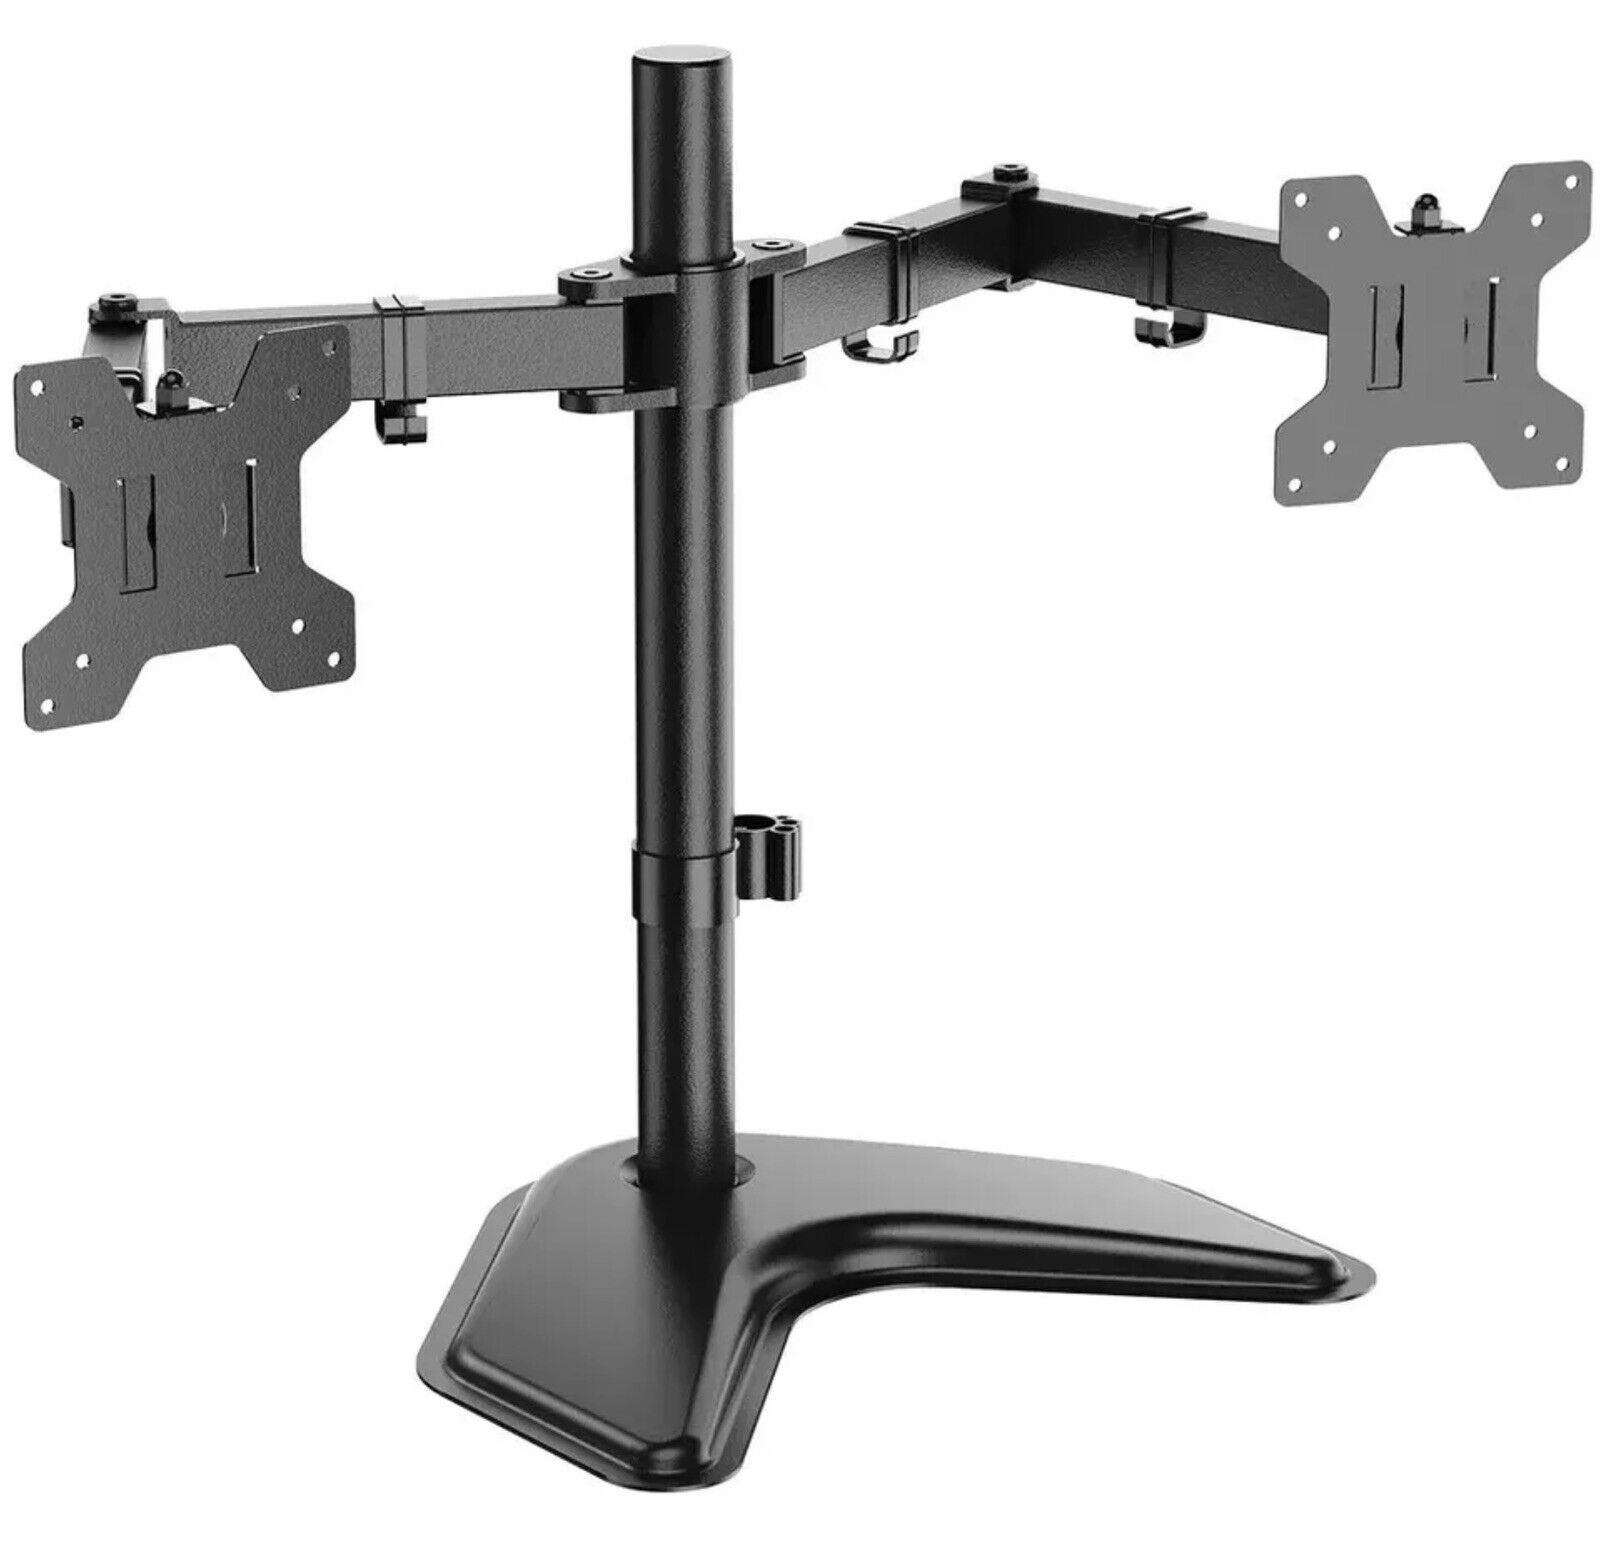 WALI Dual LCD Monitor Mount Free Standing Fully Adjustable For Desk.